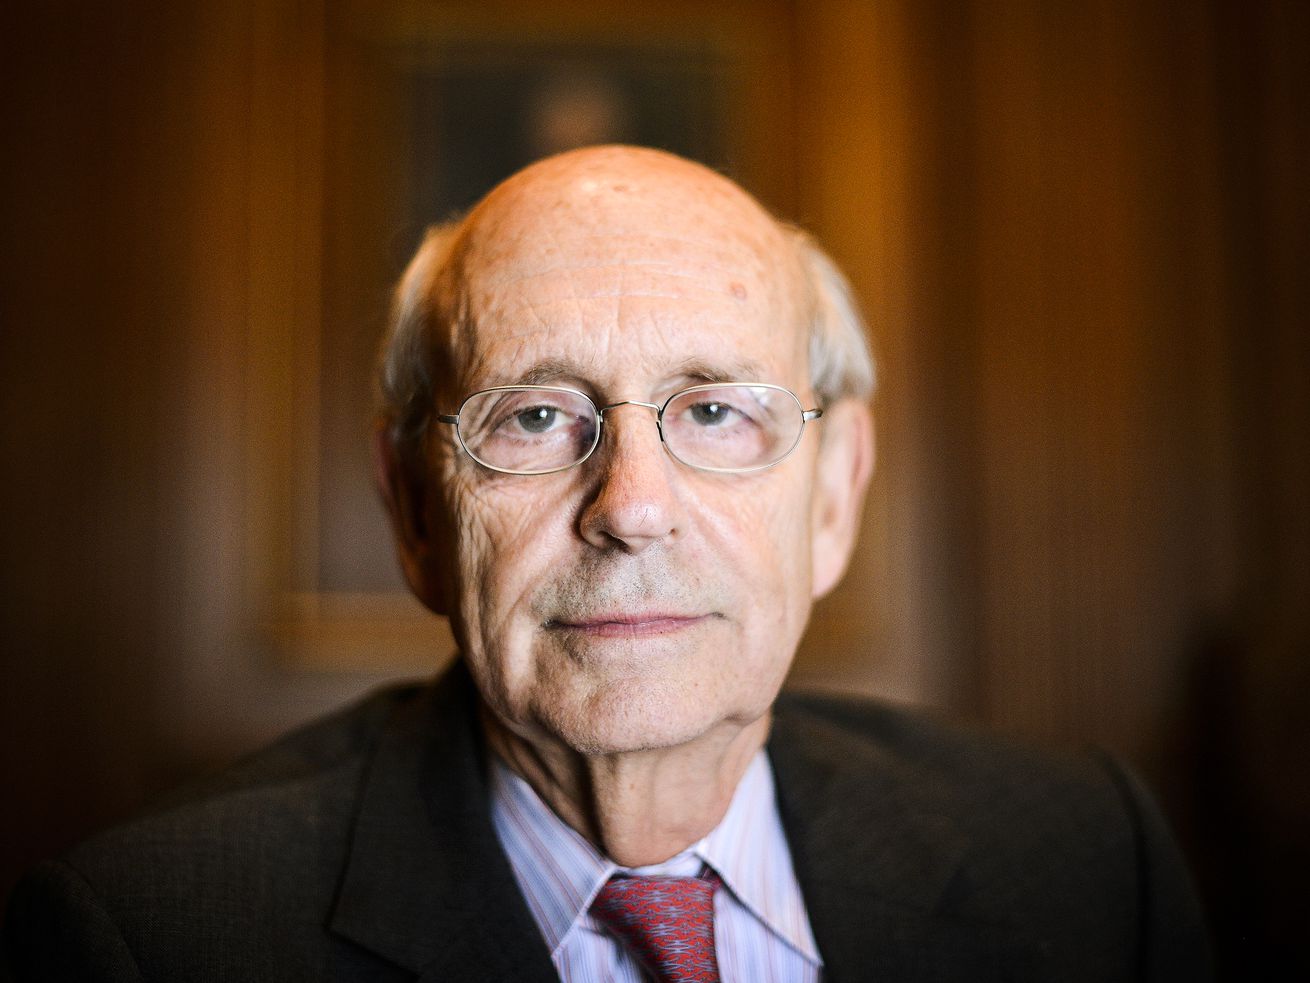 Justice Breyer’s new warning for Democrats couldn’t have come at a worse time